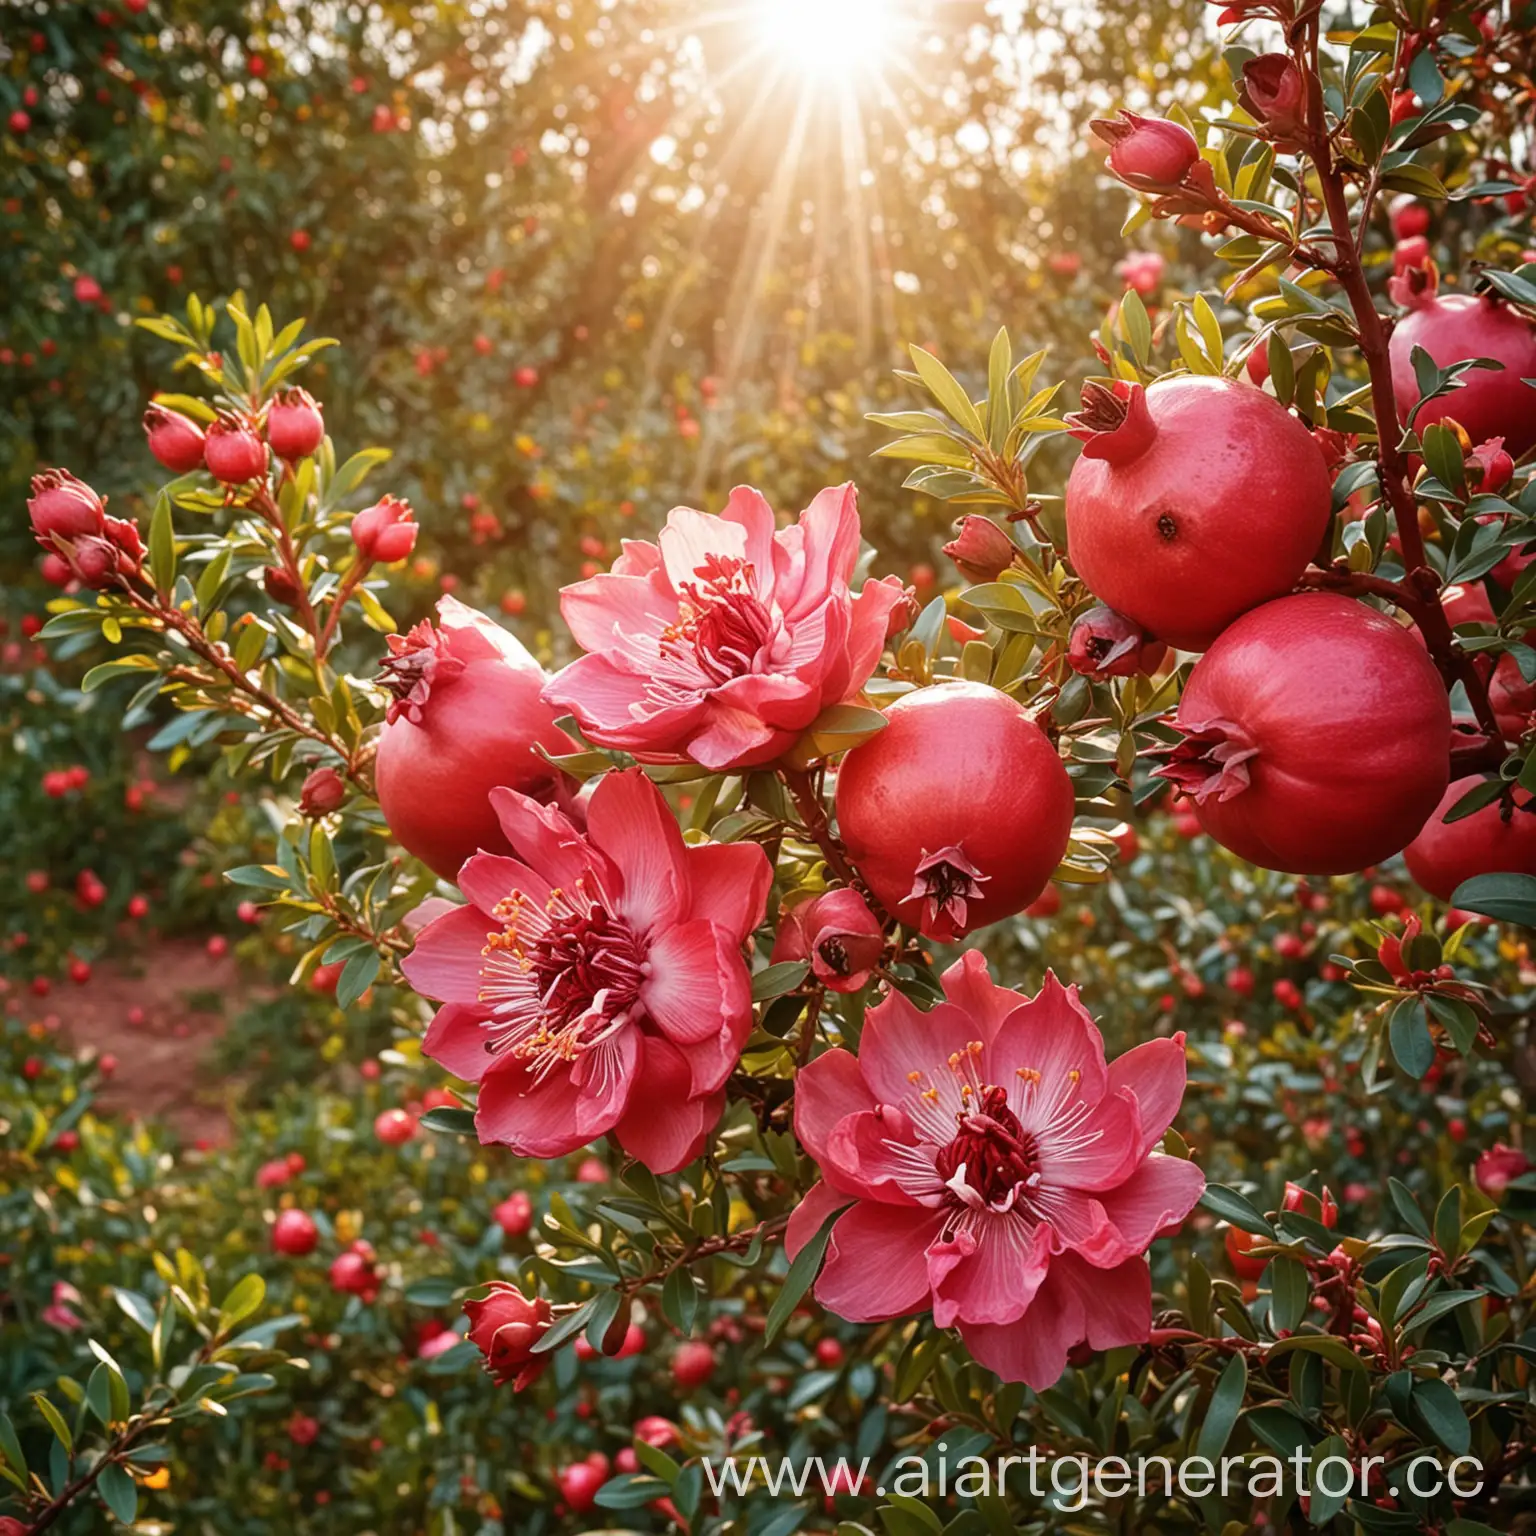 Sunlit-Pomegranate-Garden-with-Pink-and-Red-Flowers